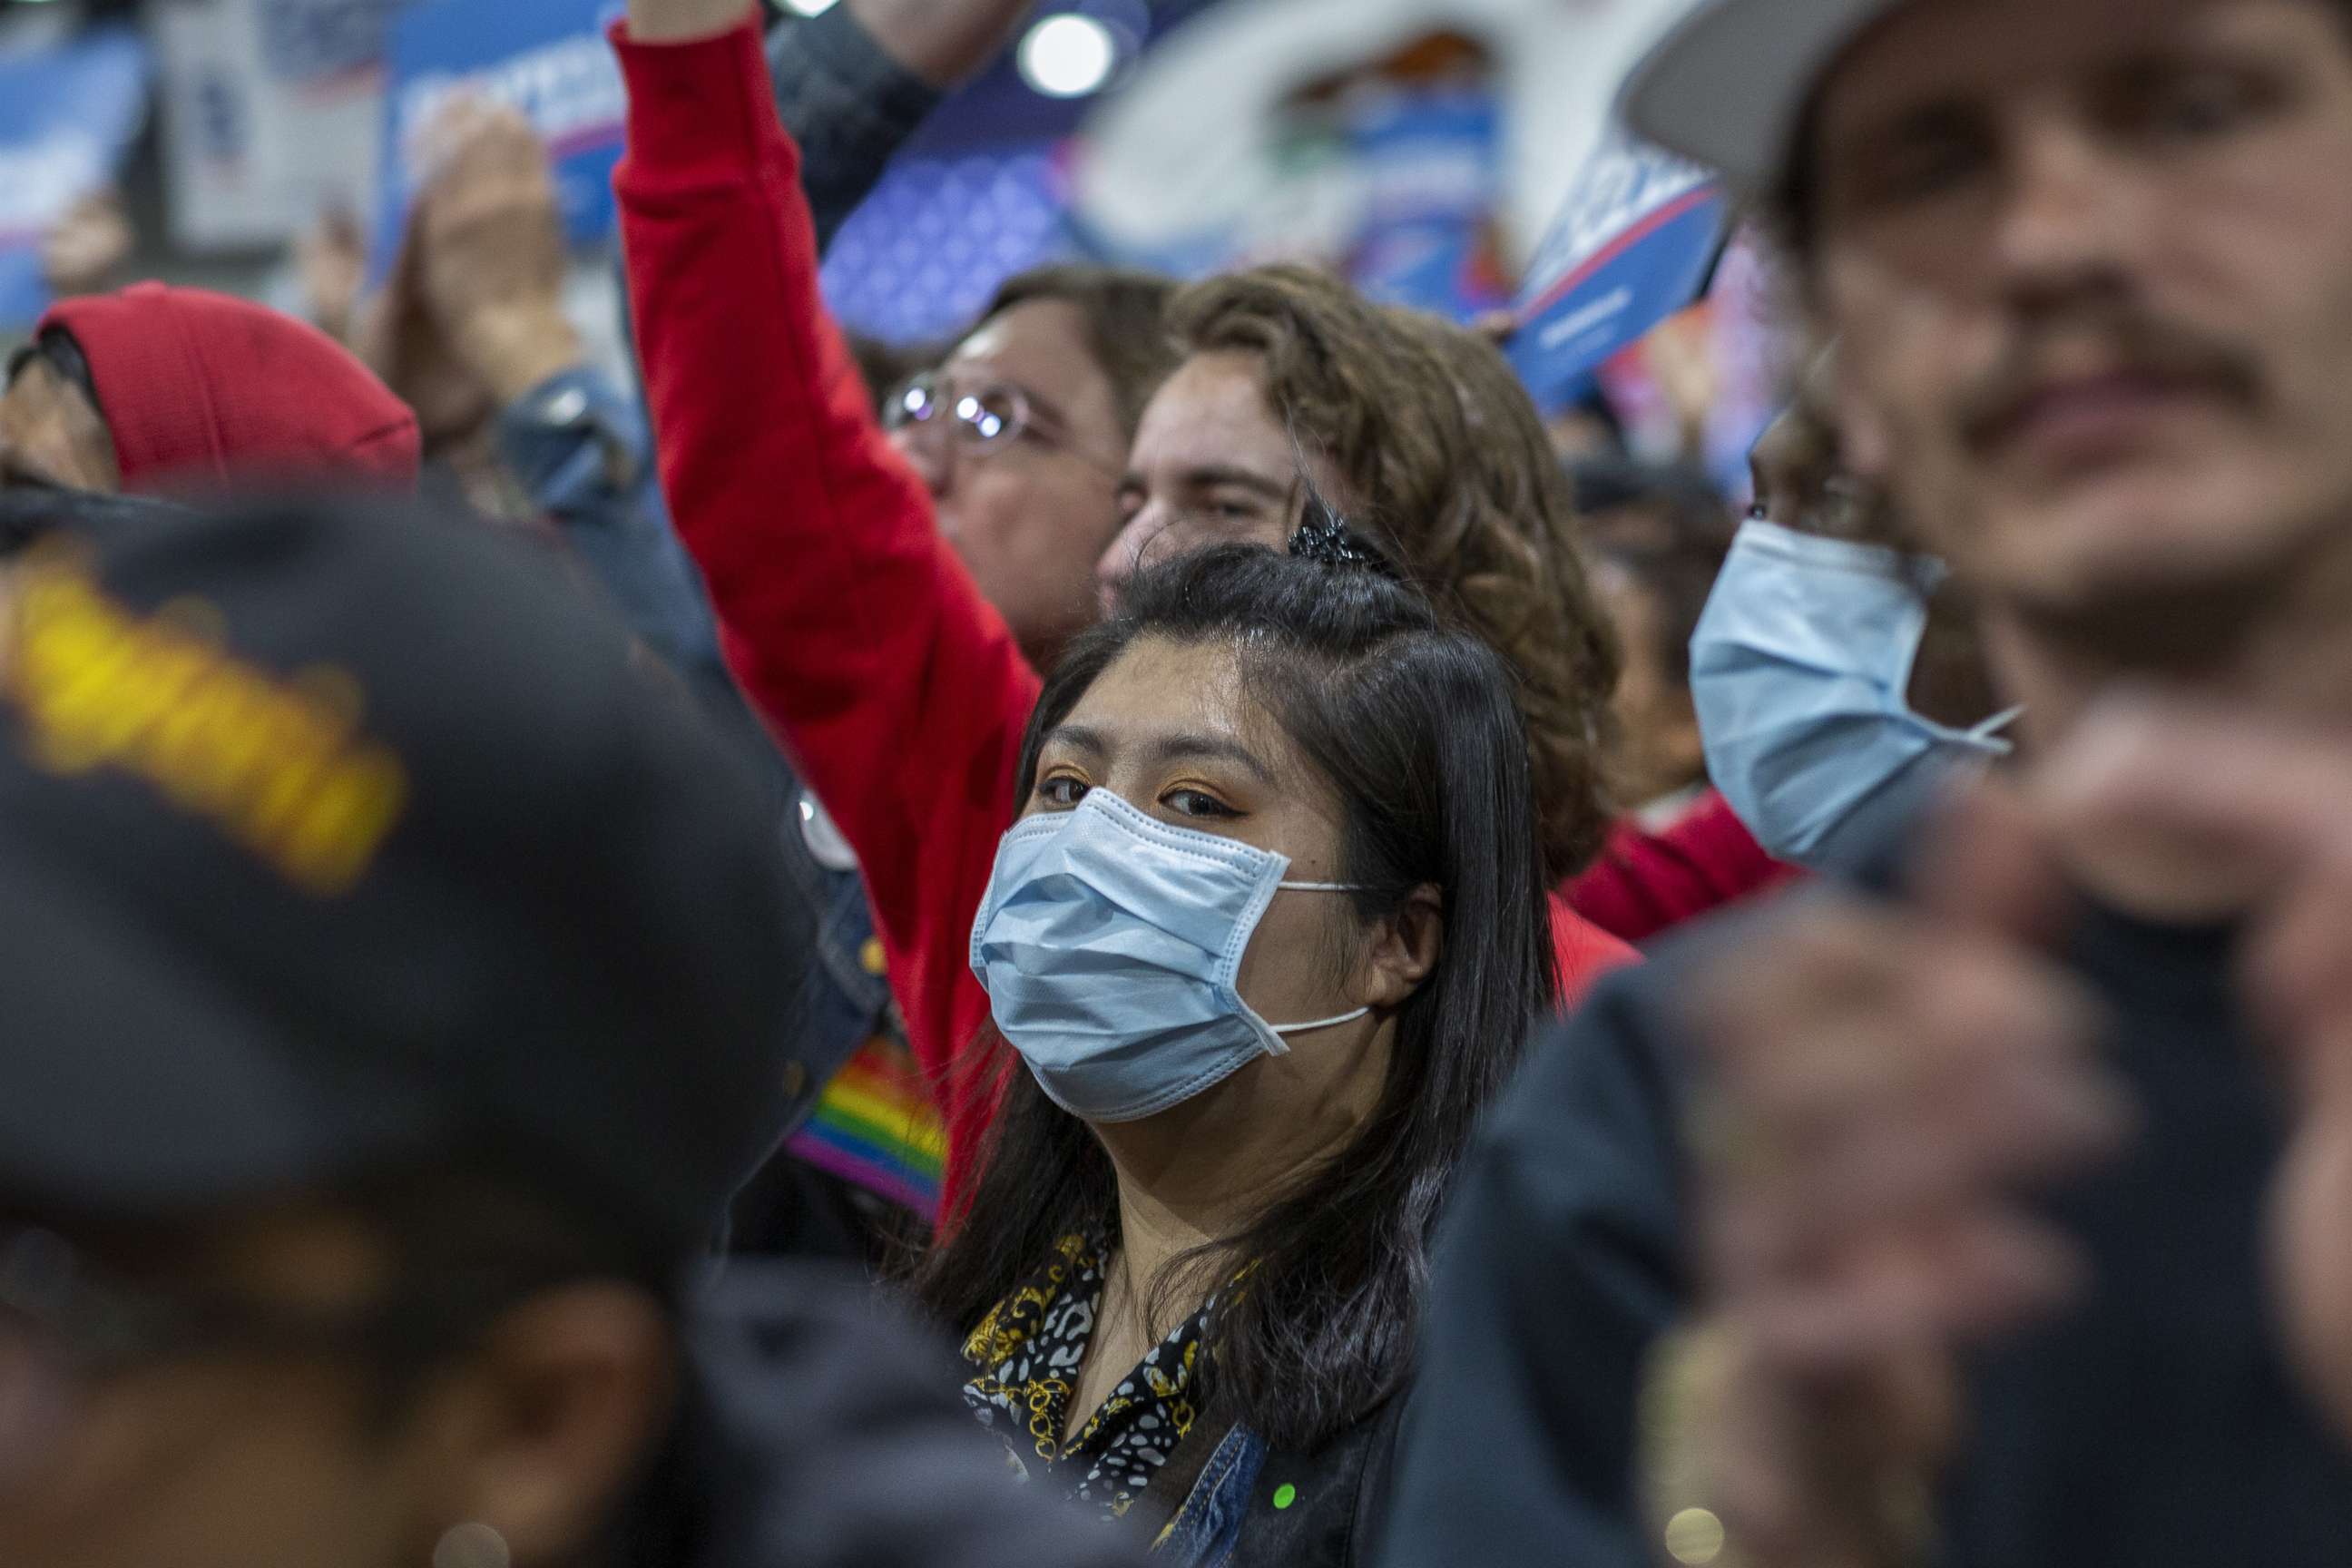 PHOTO: Supporters wear medical masks, as fears of coronavirus increase in California, during a campaign rally for presidential candidate Sen. Bernie Sanders at the Los Angeles Convention Center on March 1, 2020.